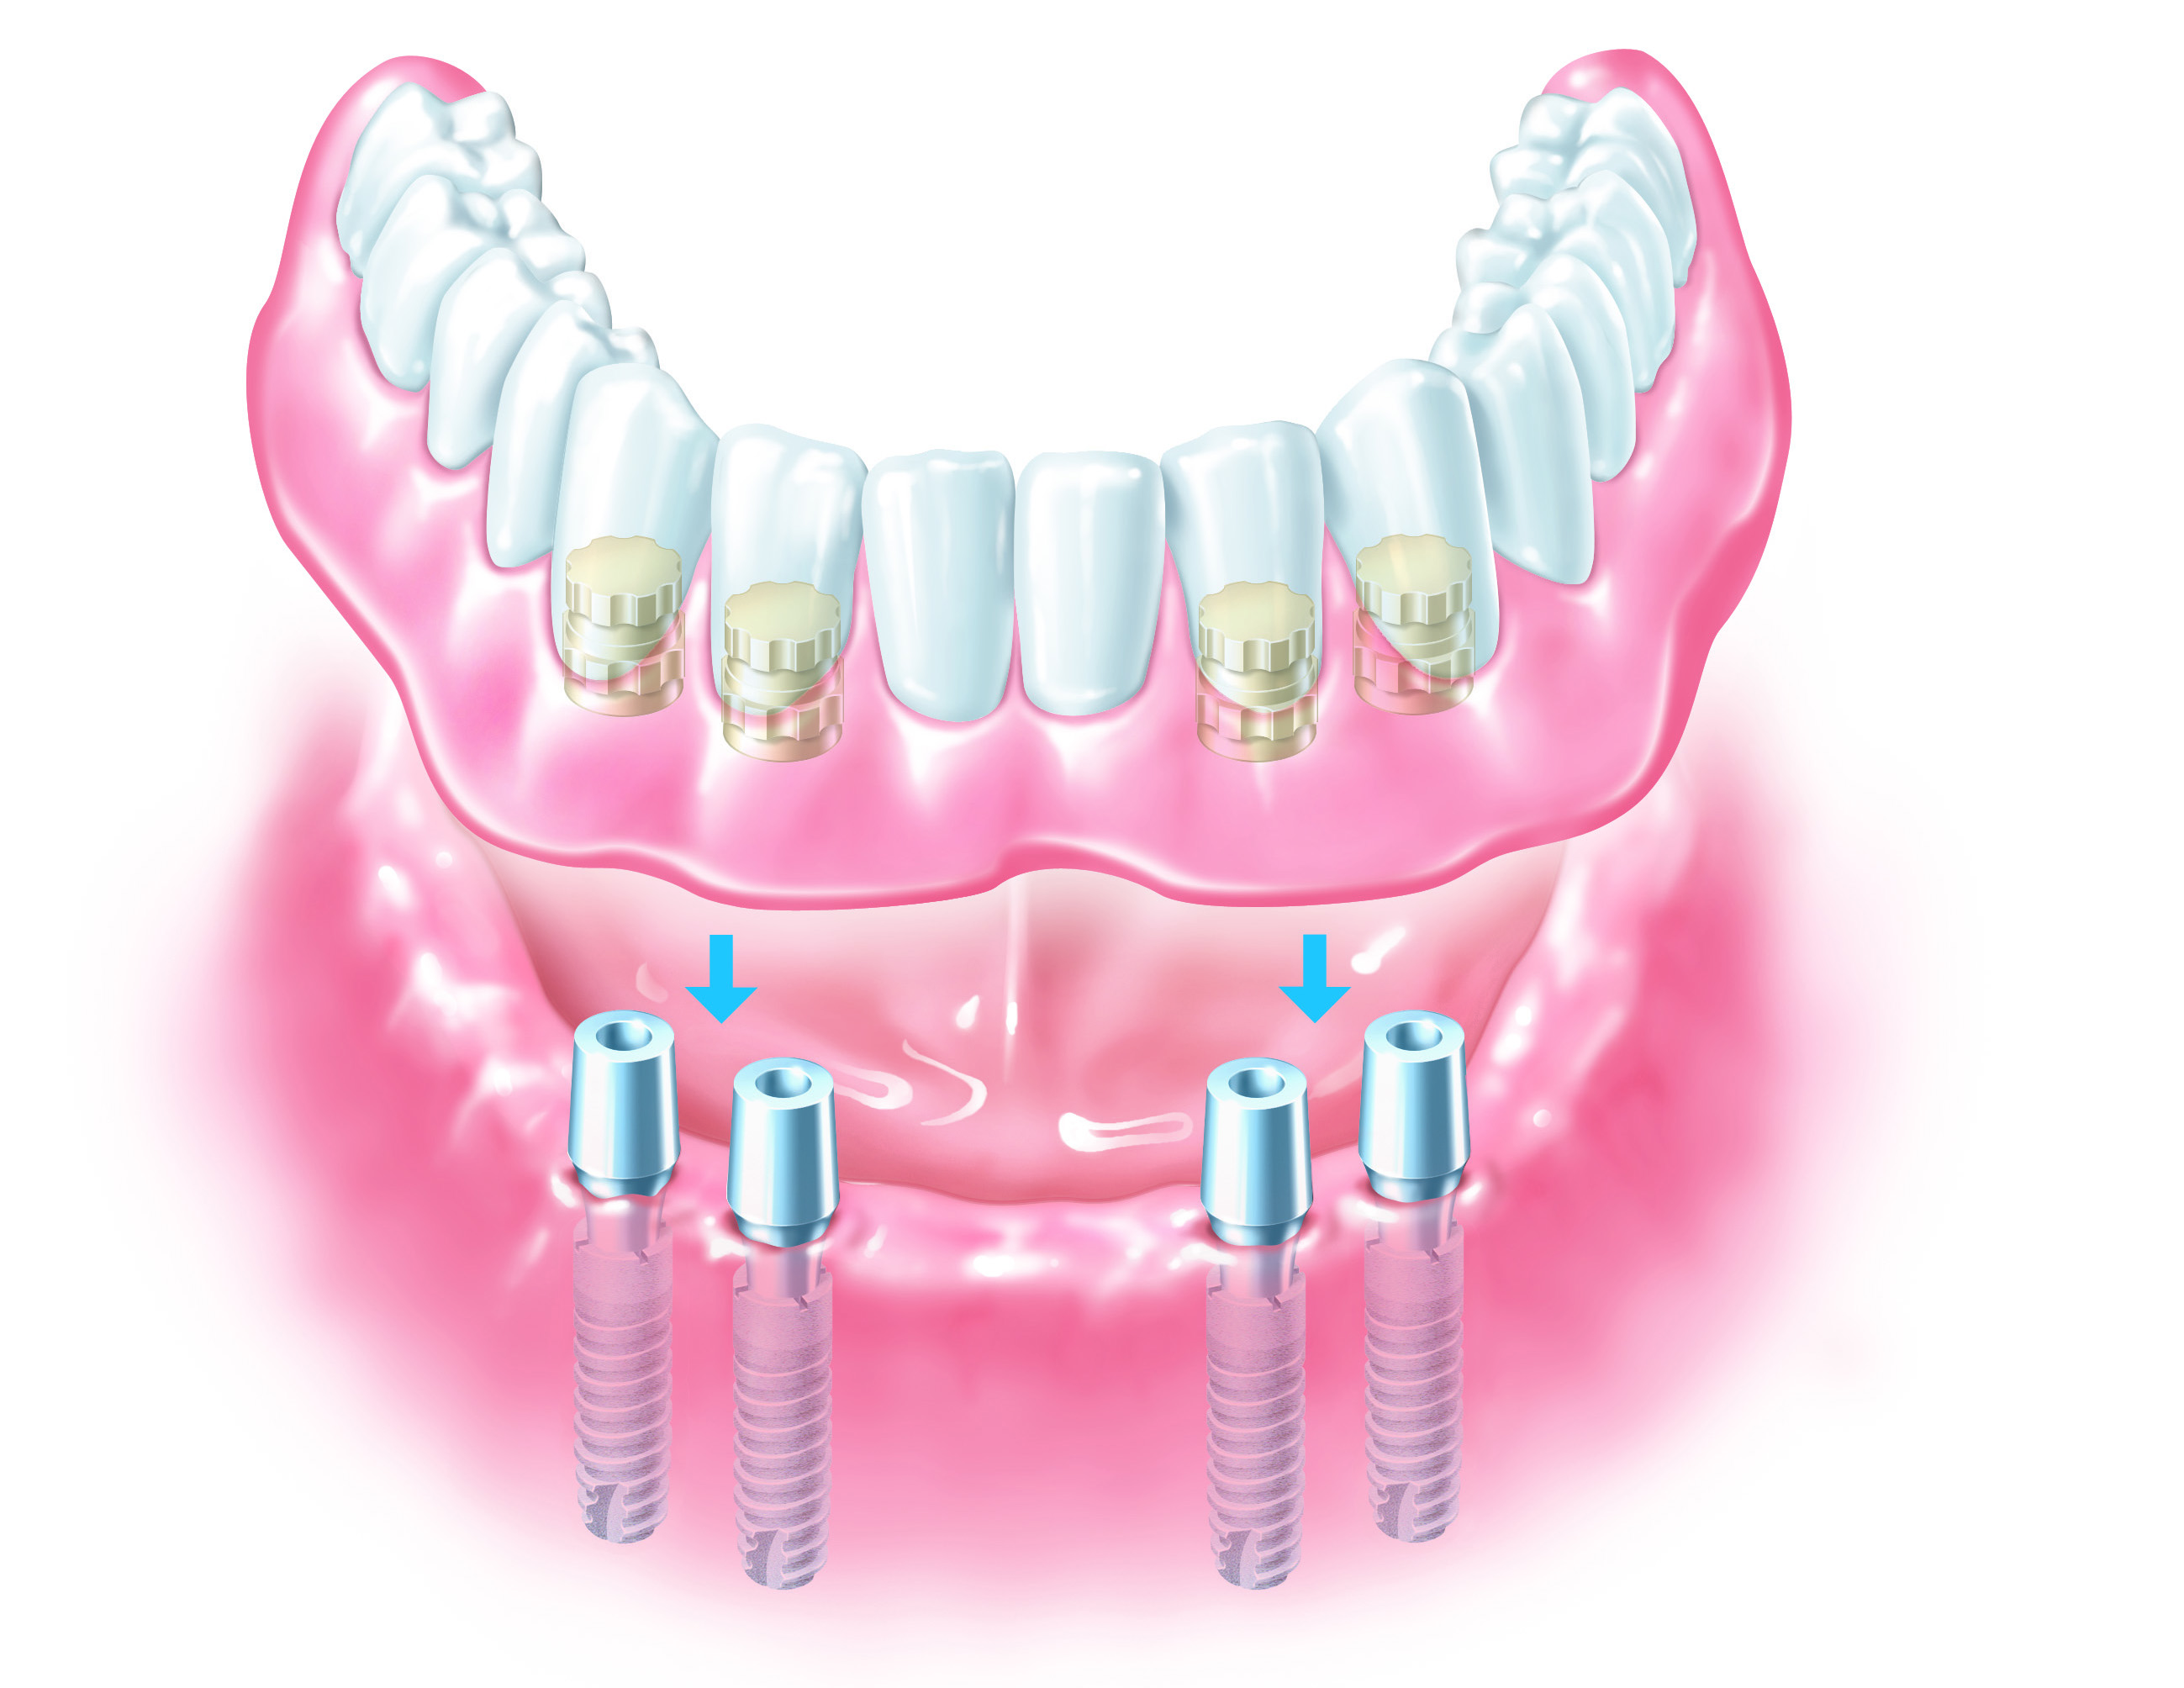 Cost of Full Mouth Dental Implants UK 2019